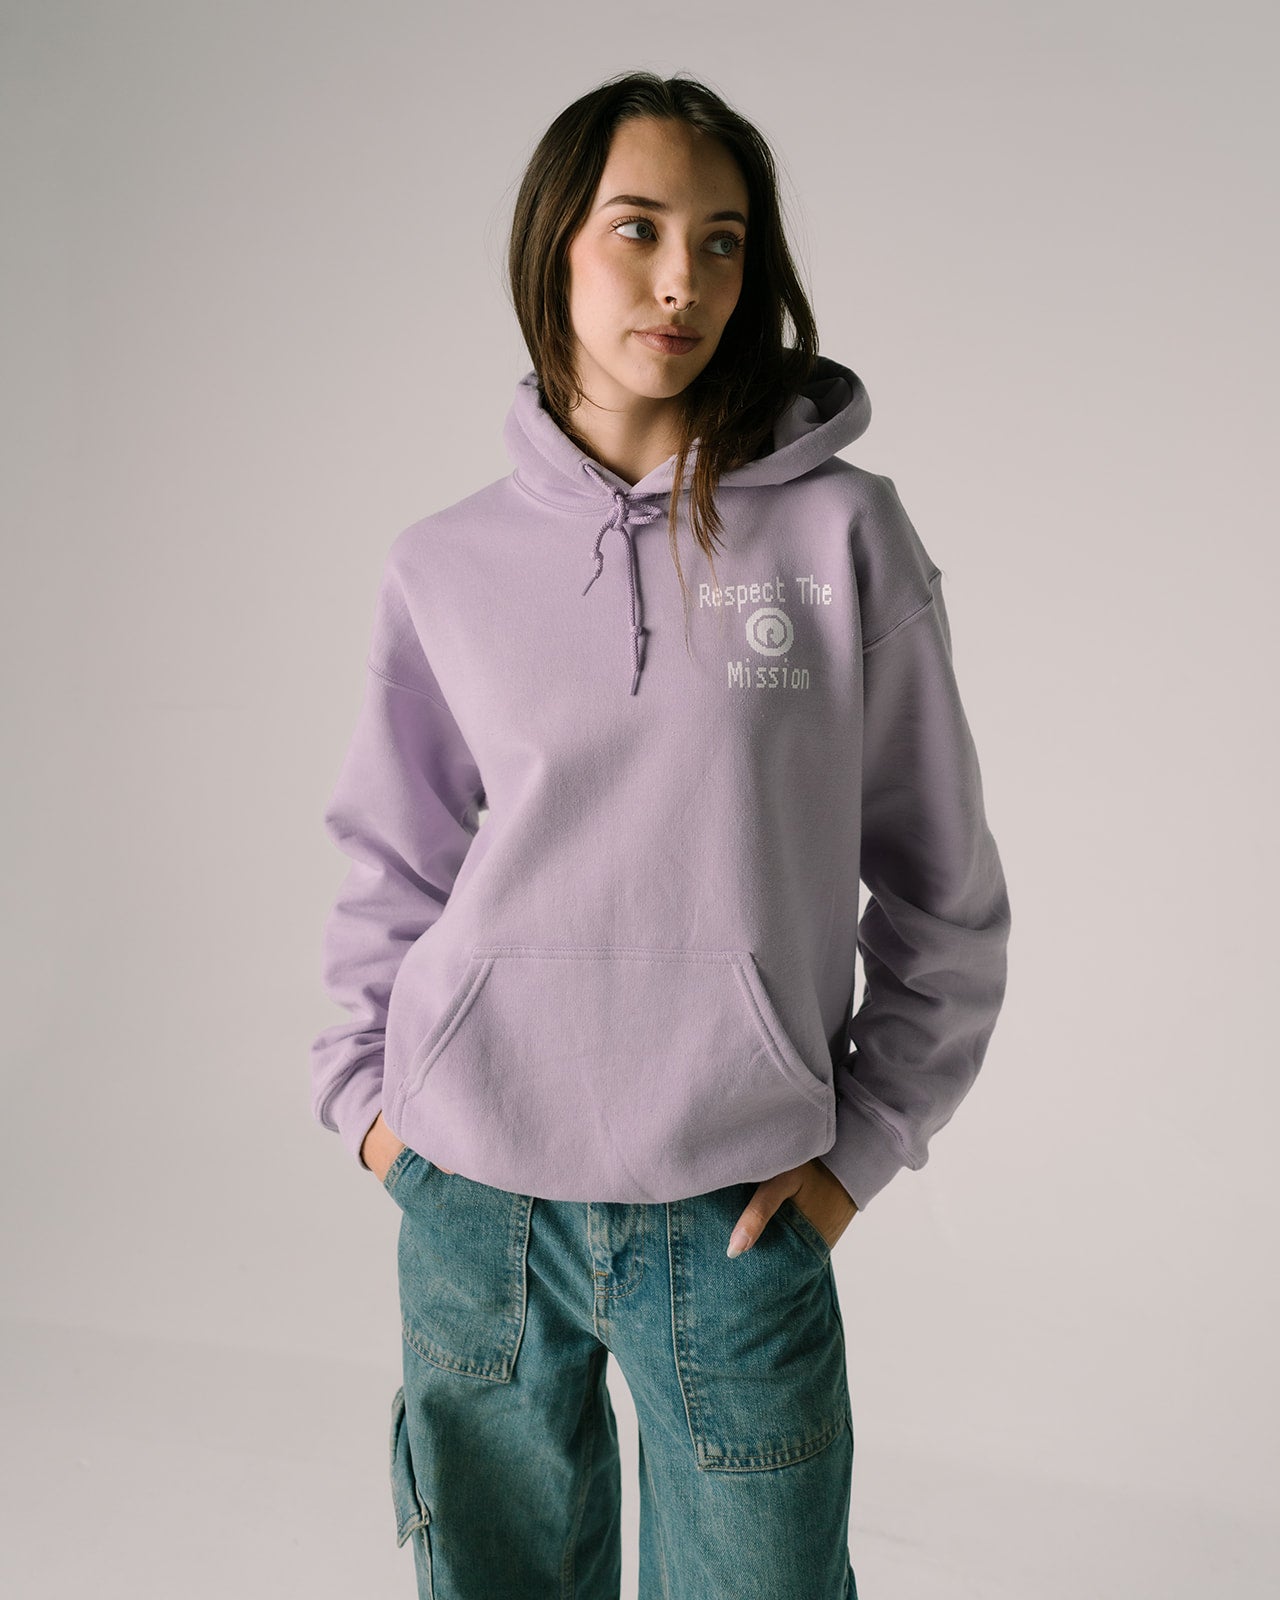 Respect The Mission Orchid Hoodie